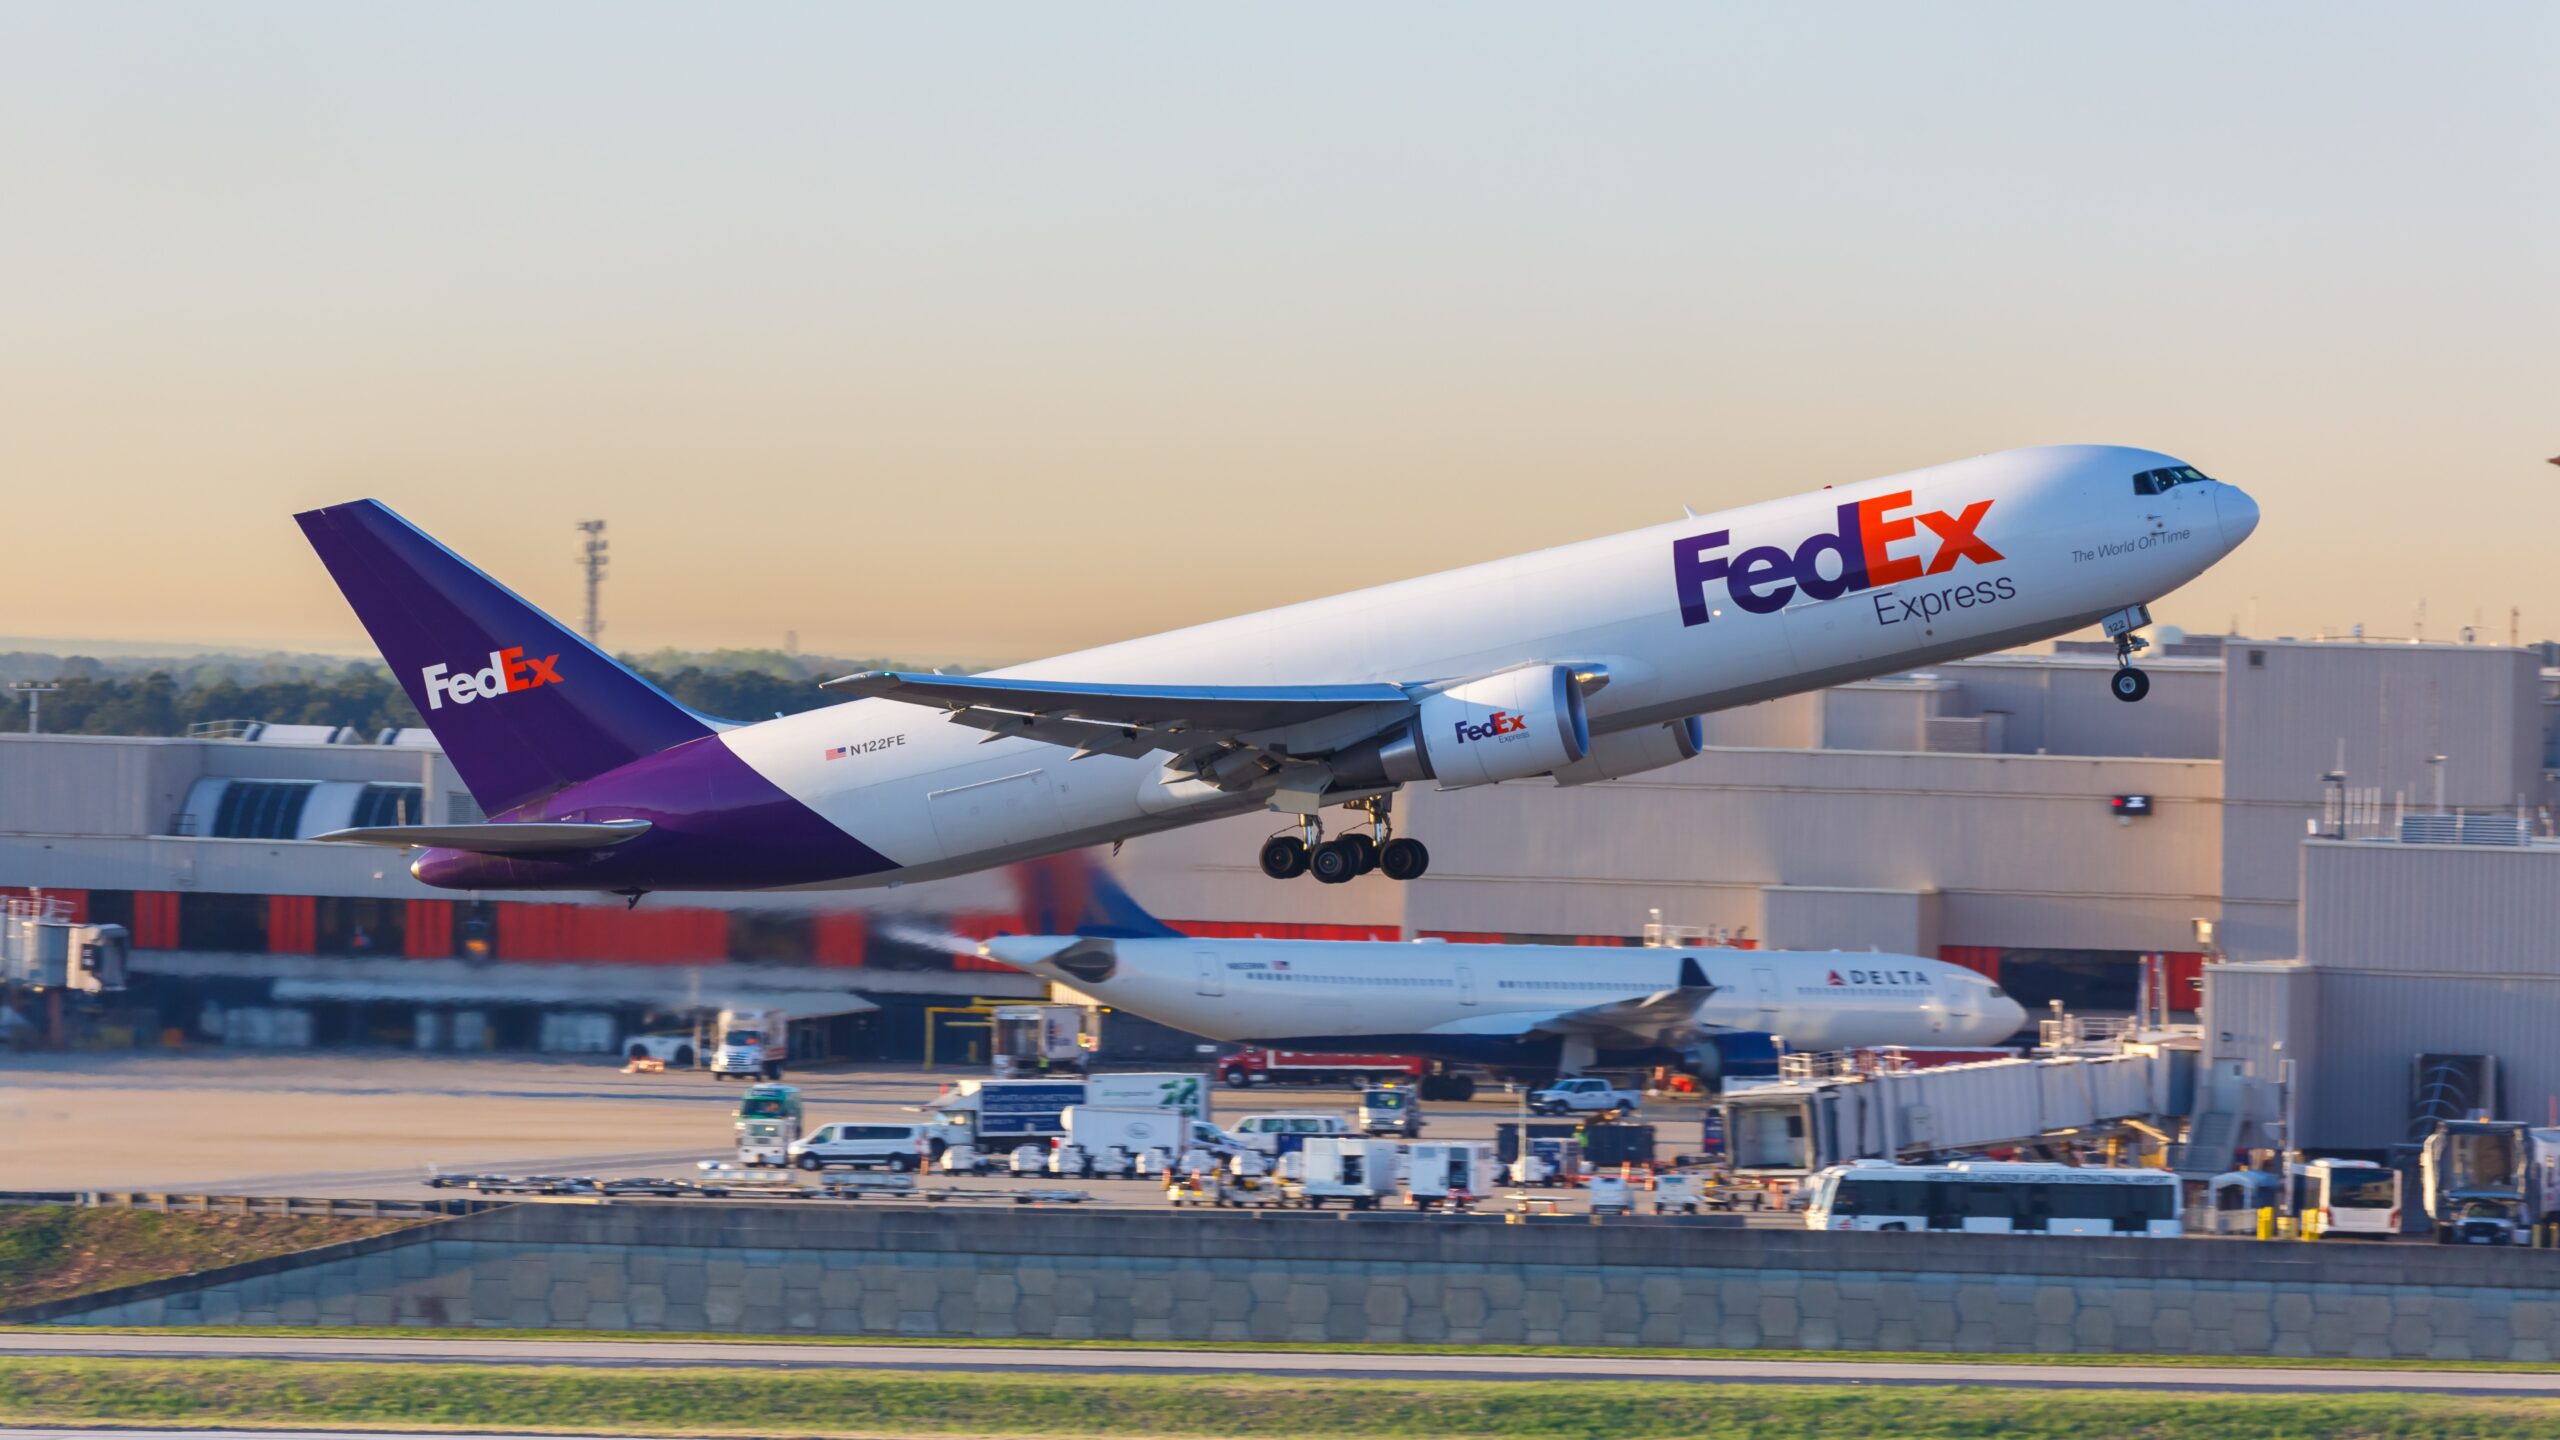 FedEx opens new Facility at Incheon Airport 1